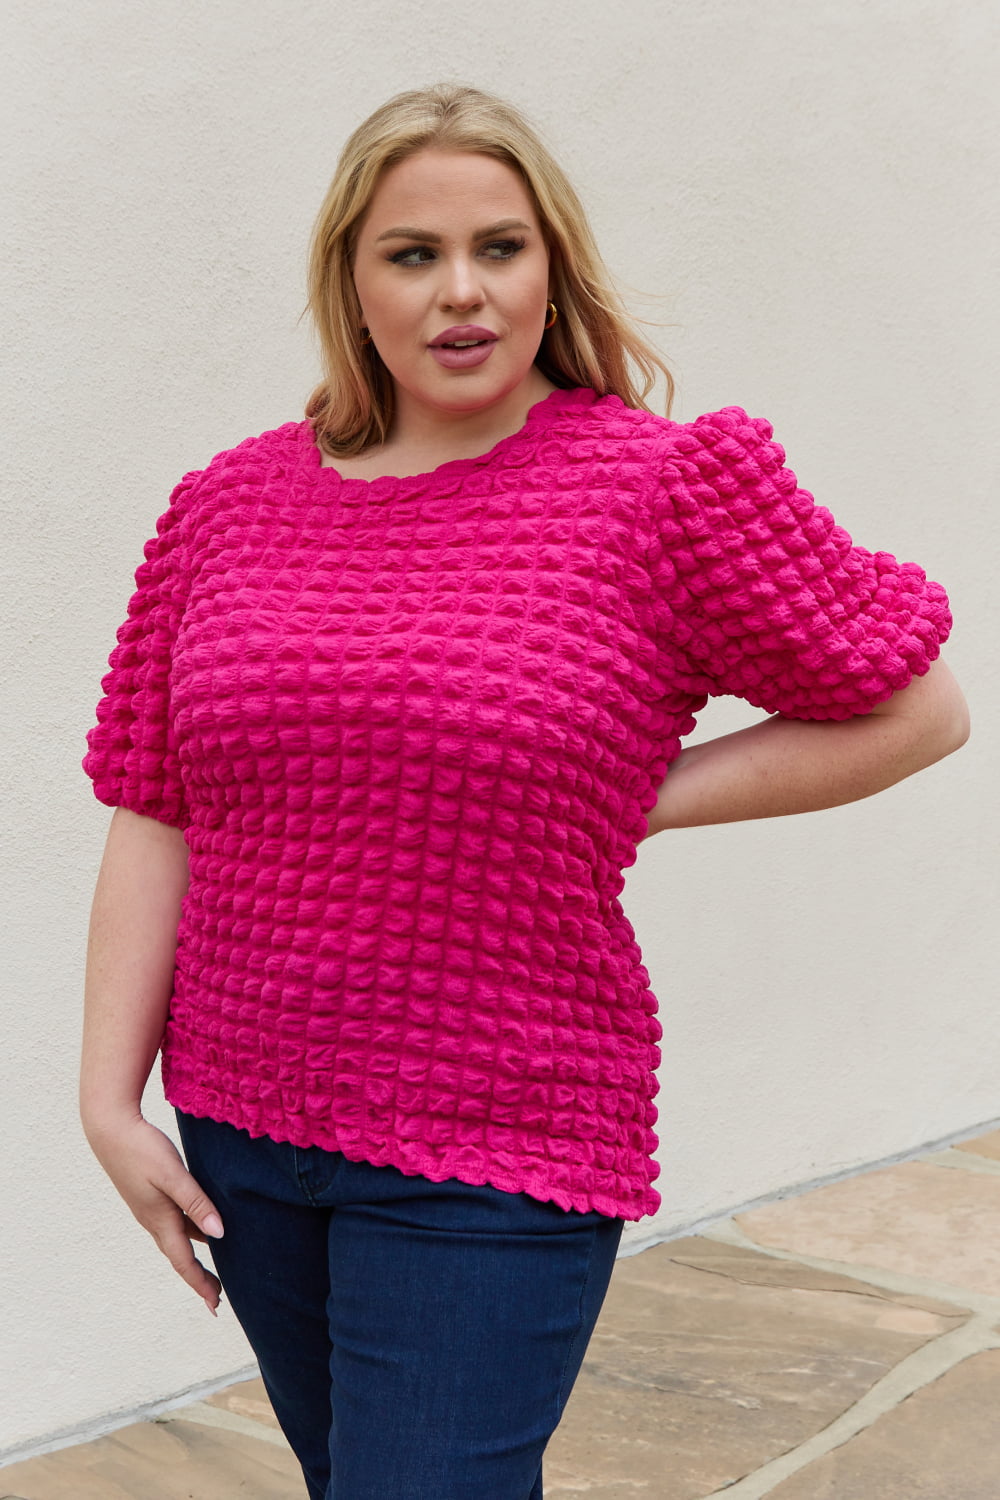 Bubble Textured Puff Sleeve Top